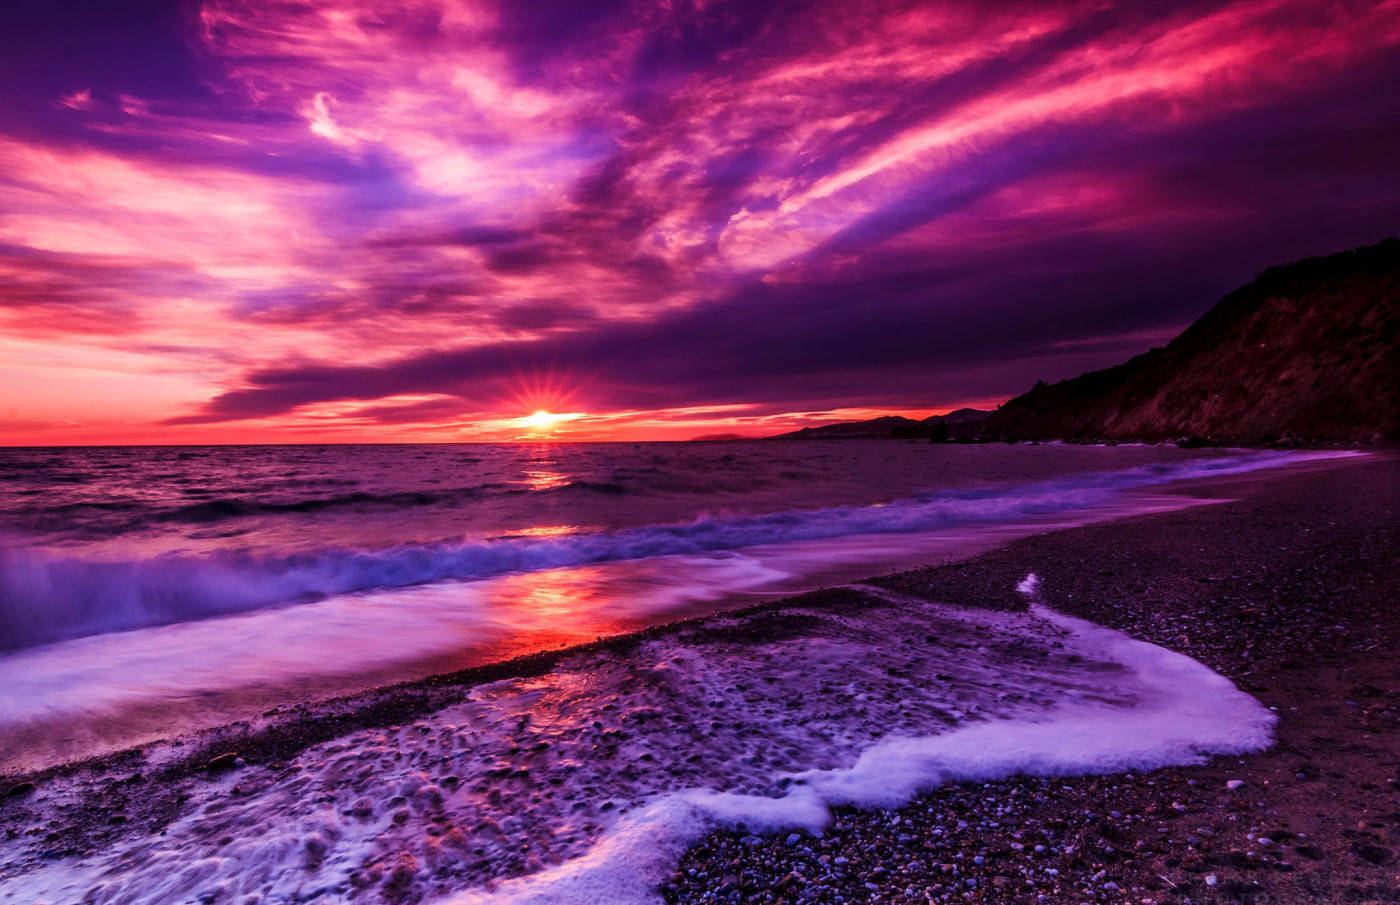 Free Pink Sunset Wallpaper Downloads, [100+] Pink Sunset Wallpapers for  FREE 